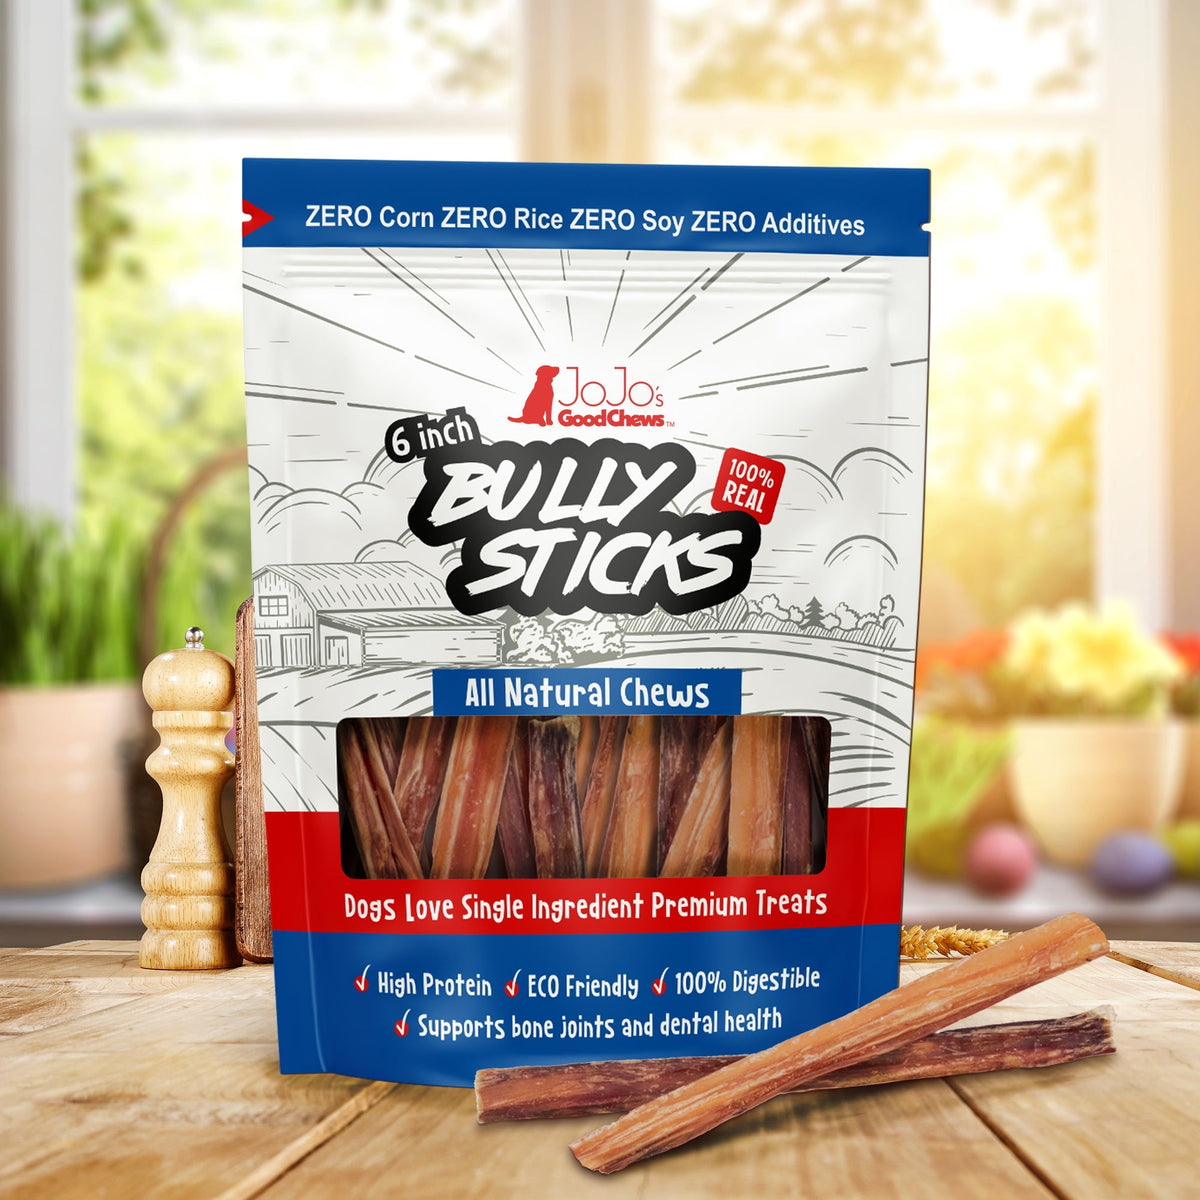 All-Natural Beef Bully Stick Dog Treats - 6" Standard (4-Pack) by American Pet Supplies